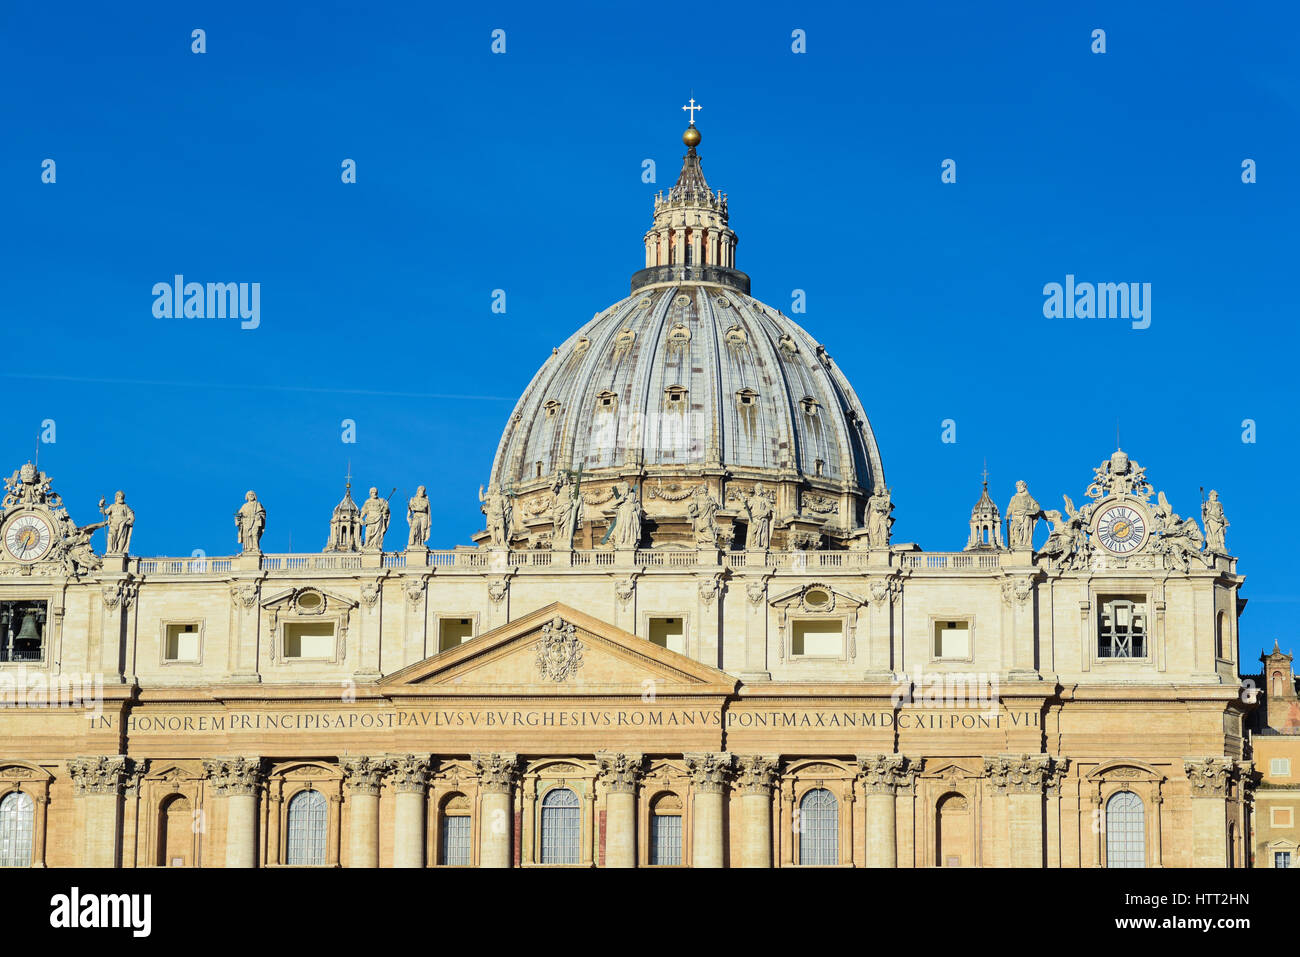 St Peter Basilica Vatican Church In Rome Dome And Facade View At Sunrise Lights Stock Photo Alamy